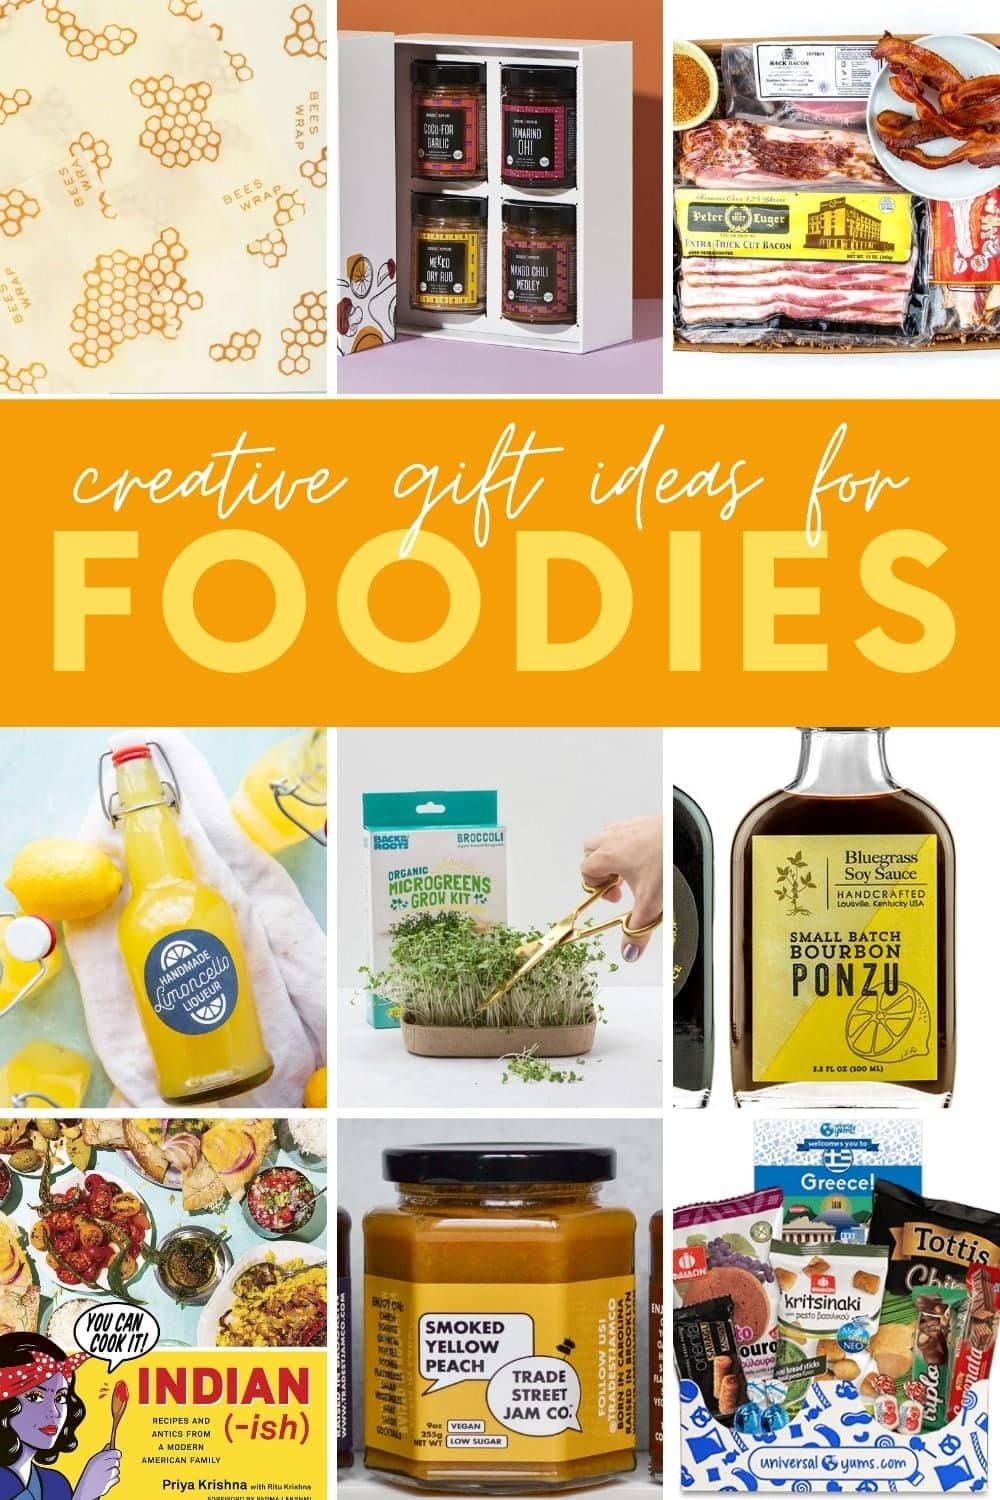 Collage of nine gift ideas for foodies. A text overlay reads, "Creative Gift Ideas for Foodies."